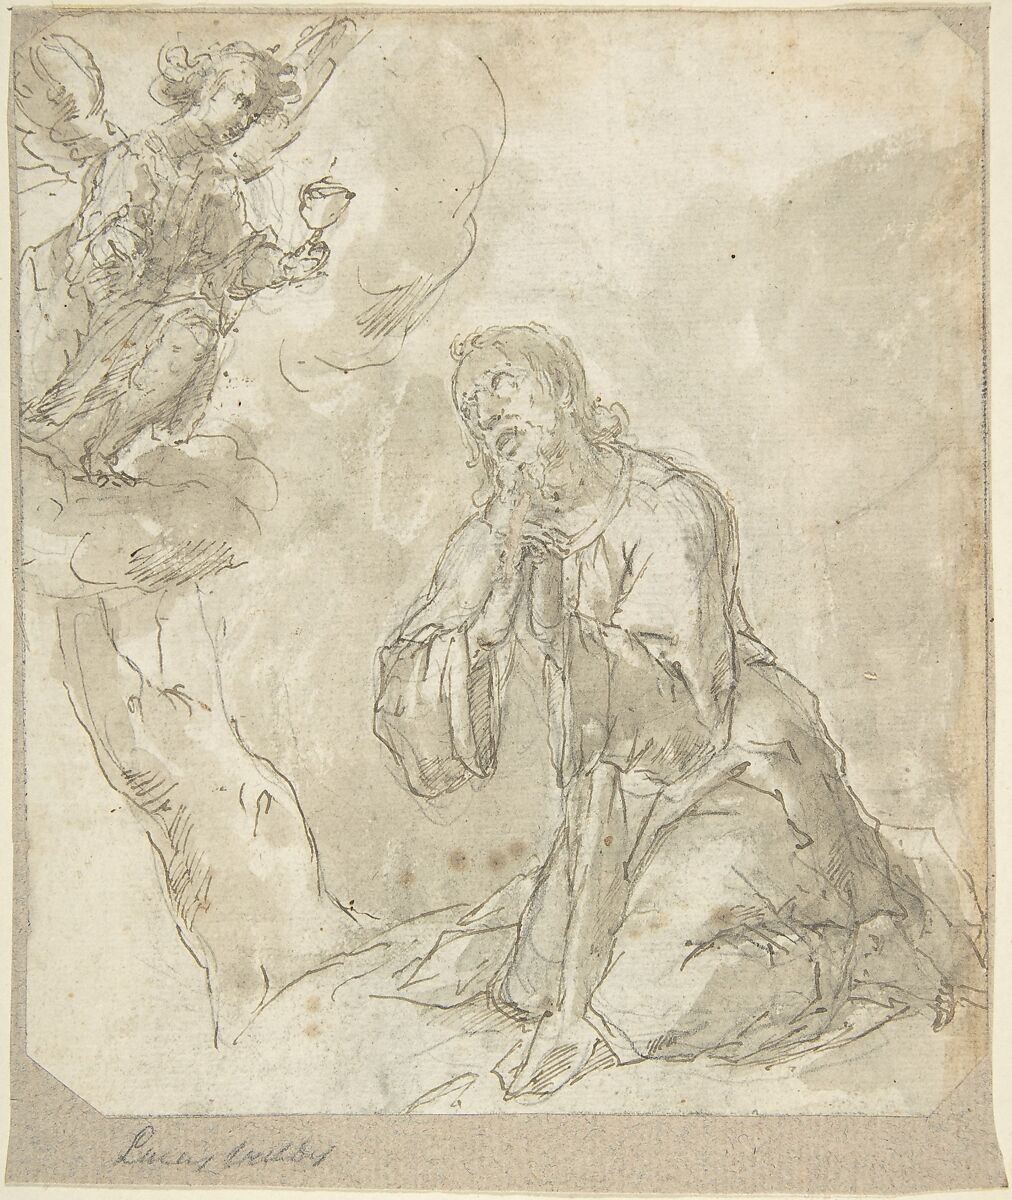 Agony in the Garden, Anonymous, Spanish, School of Seville, 17th century, Pen and dark brown ink, over black chalk underdrawing, brush with light gray-brown wash over both. Outlines of composition in black chalk at borders of sheet. On off-white paper 